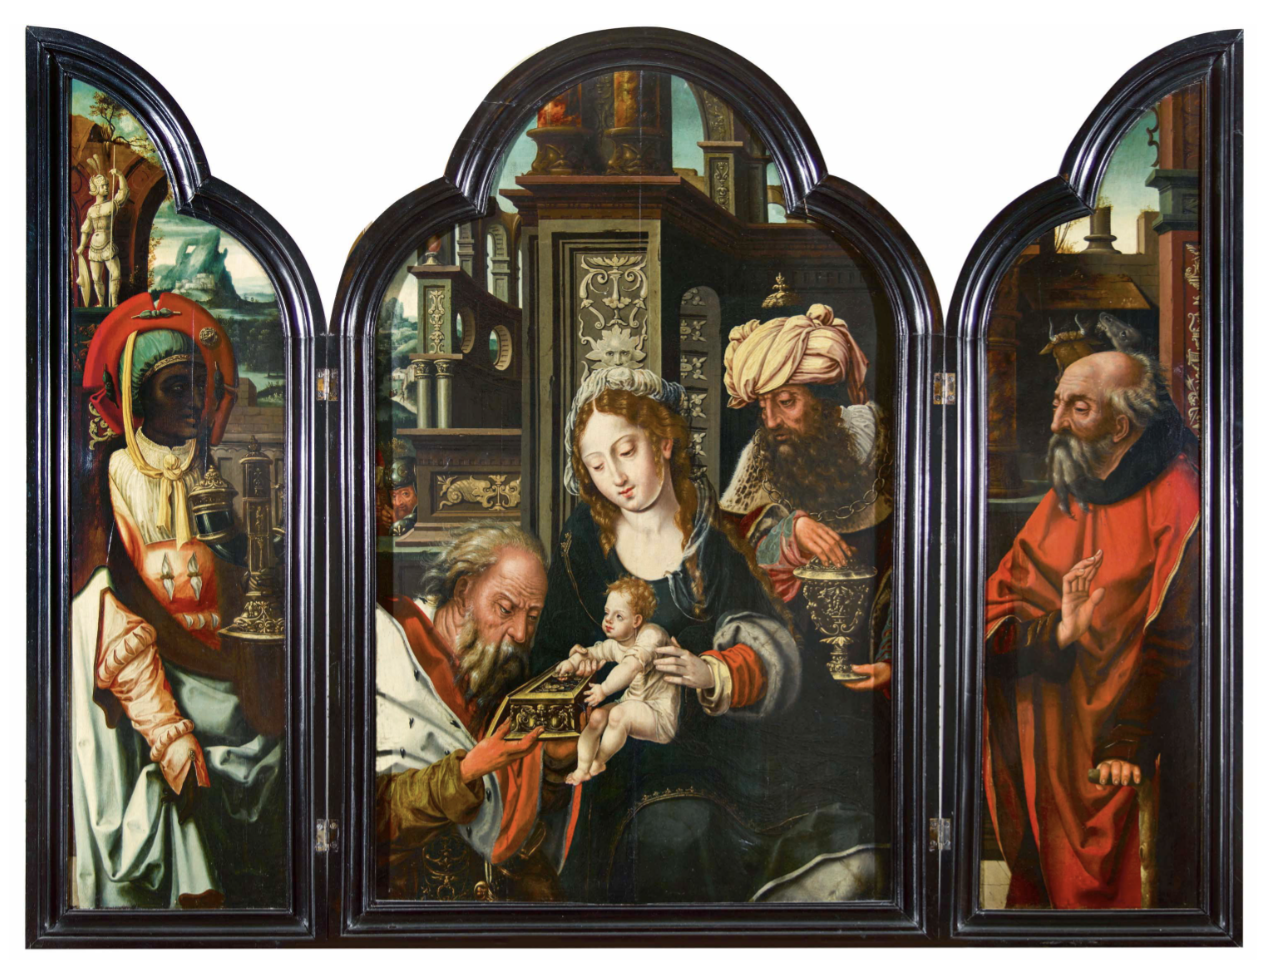 Circle or workshop of Pieter Coecke van Aelst the Elder: The Adoration of the Magi, oil on three oak panels, 38 1/5 by 51 1/5 inches.